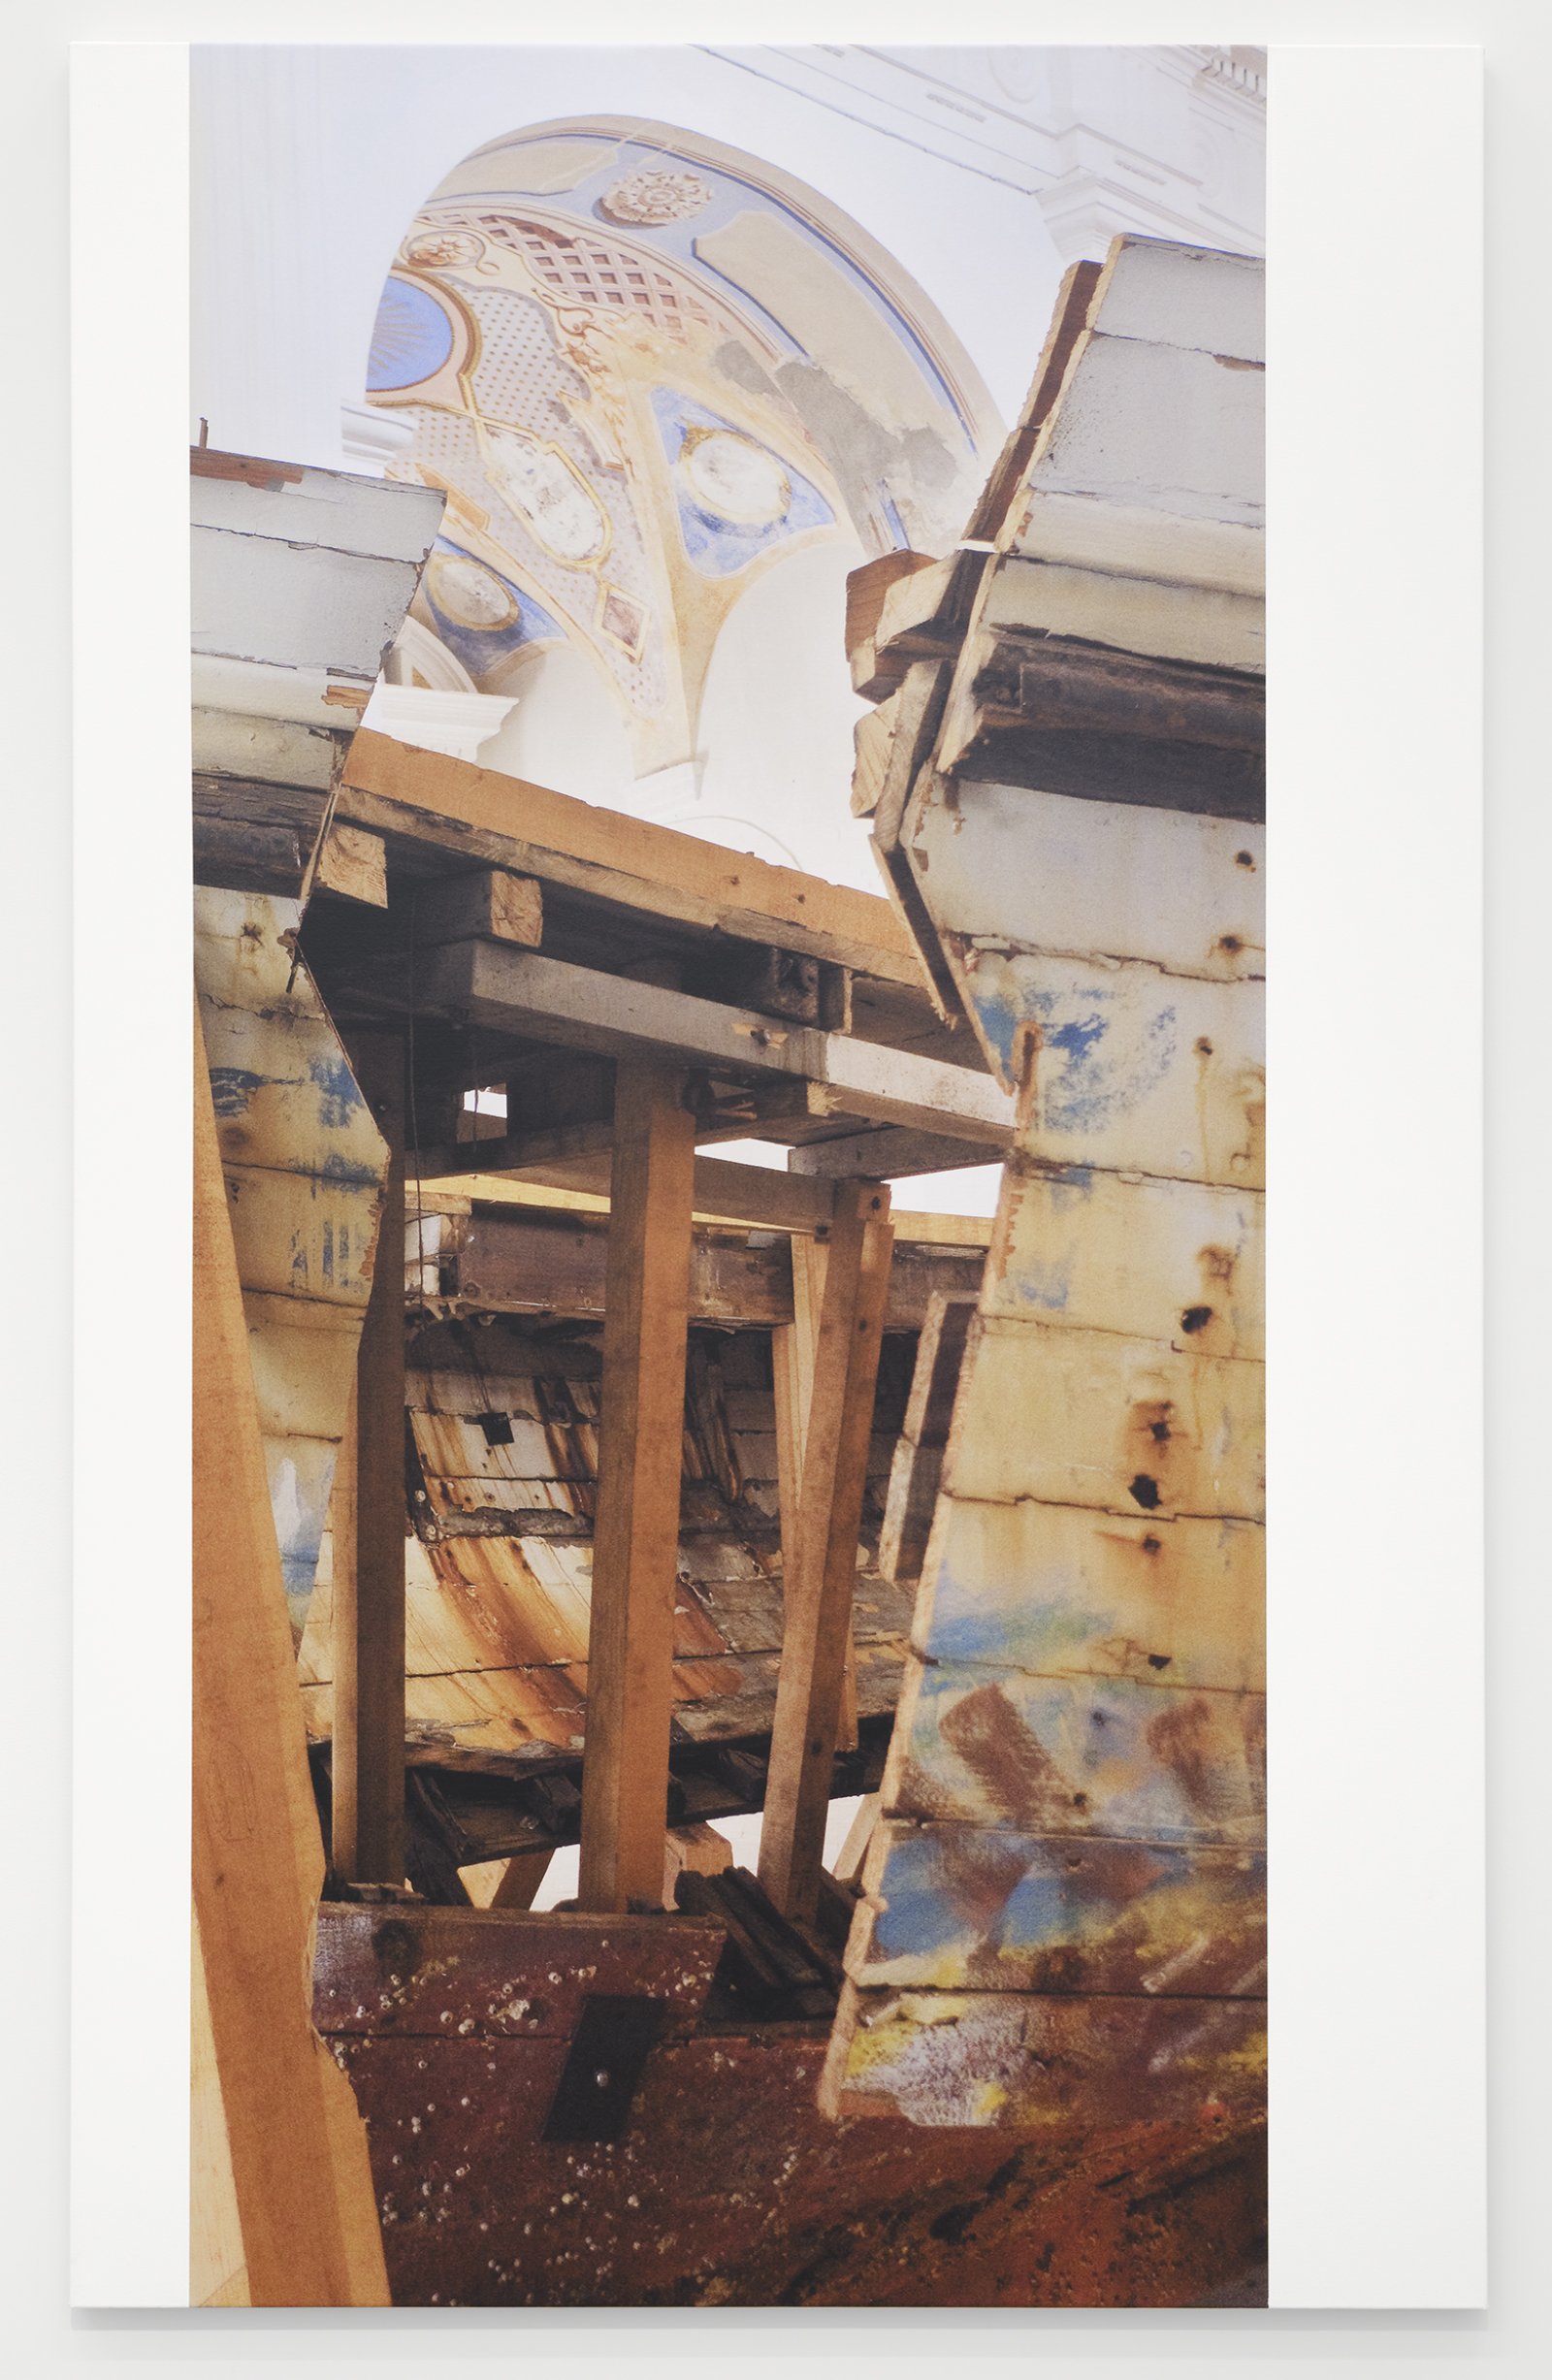 Ian Wallace, Shipwreck (After Naufragio con Spettatore by Claudio Parmiggiani) I–IV, 2010, photolaminate with acrylic on canvas, 4 parts, each 96 x 60 in. (244 x 152 cm)